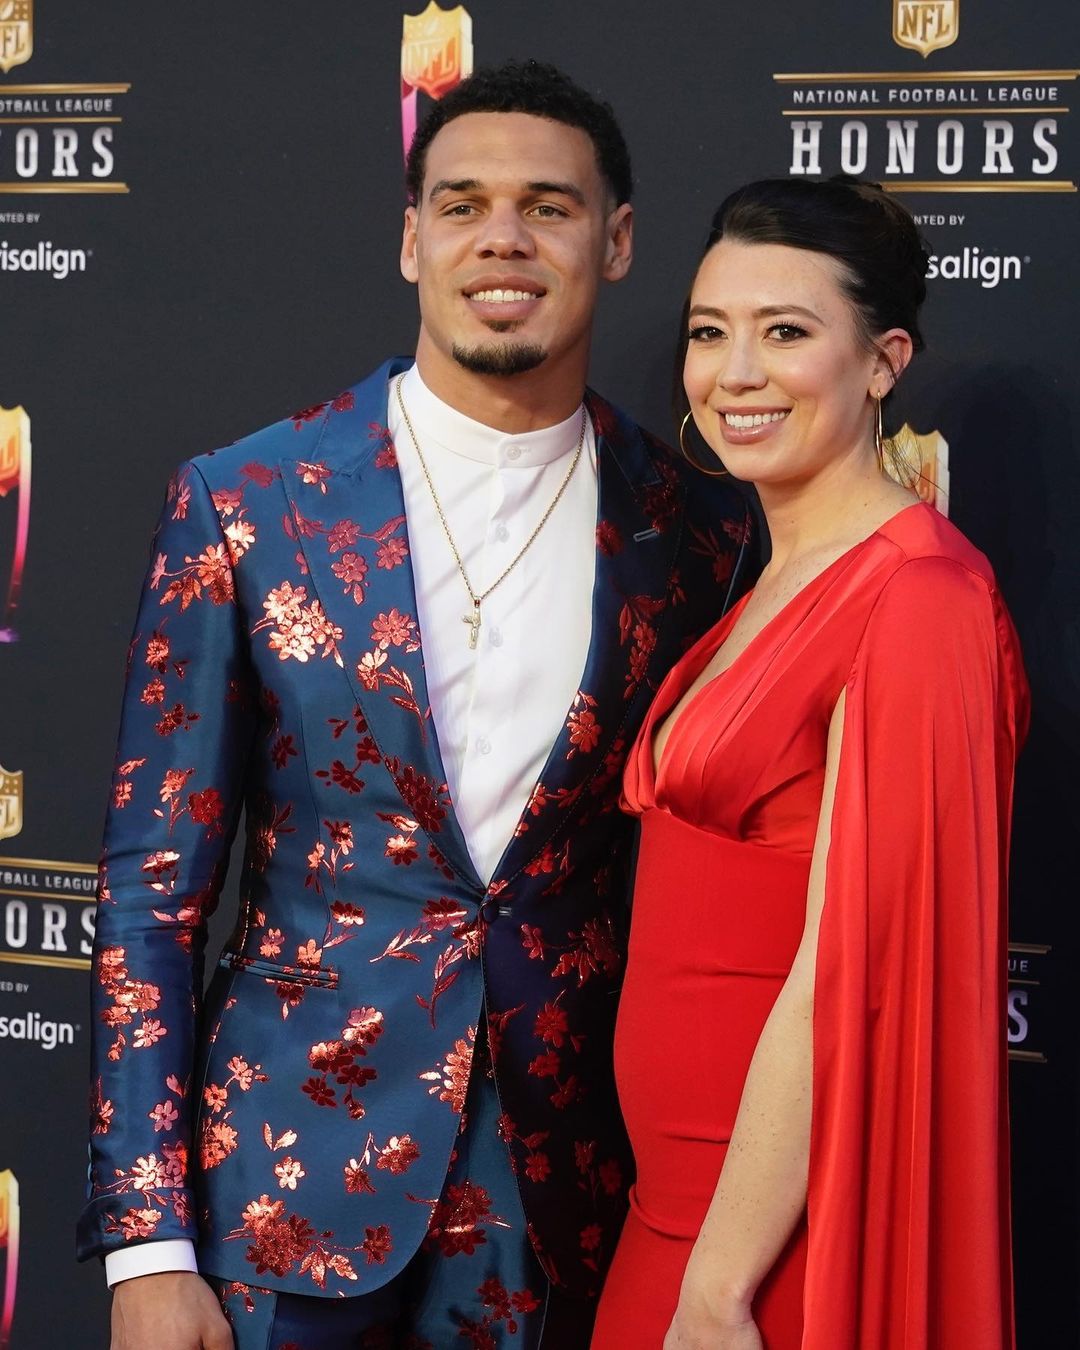 Justin Simmons with his wife Taryn Simmons at NFL Honors